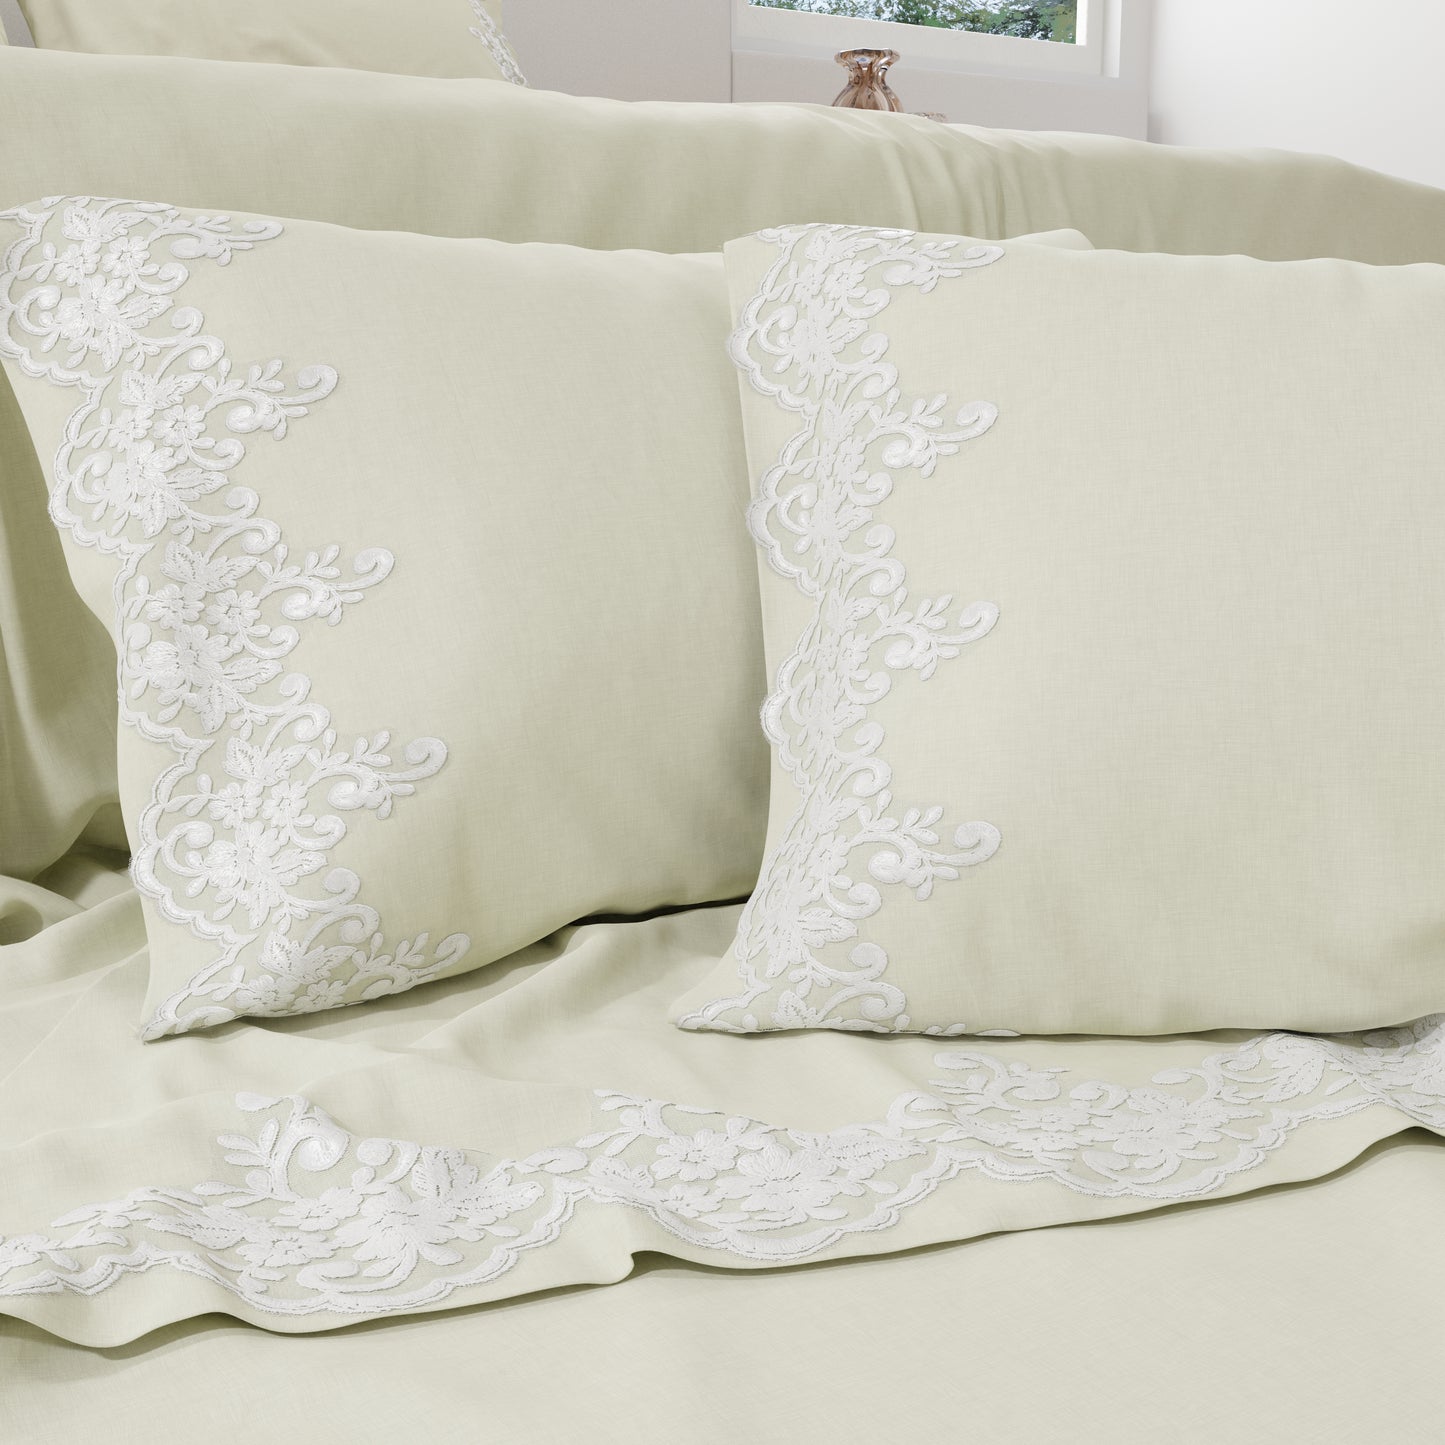 Percale Sheets with Lace, Cream Cotton Double Sheets